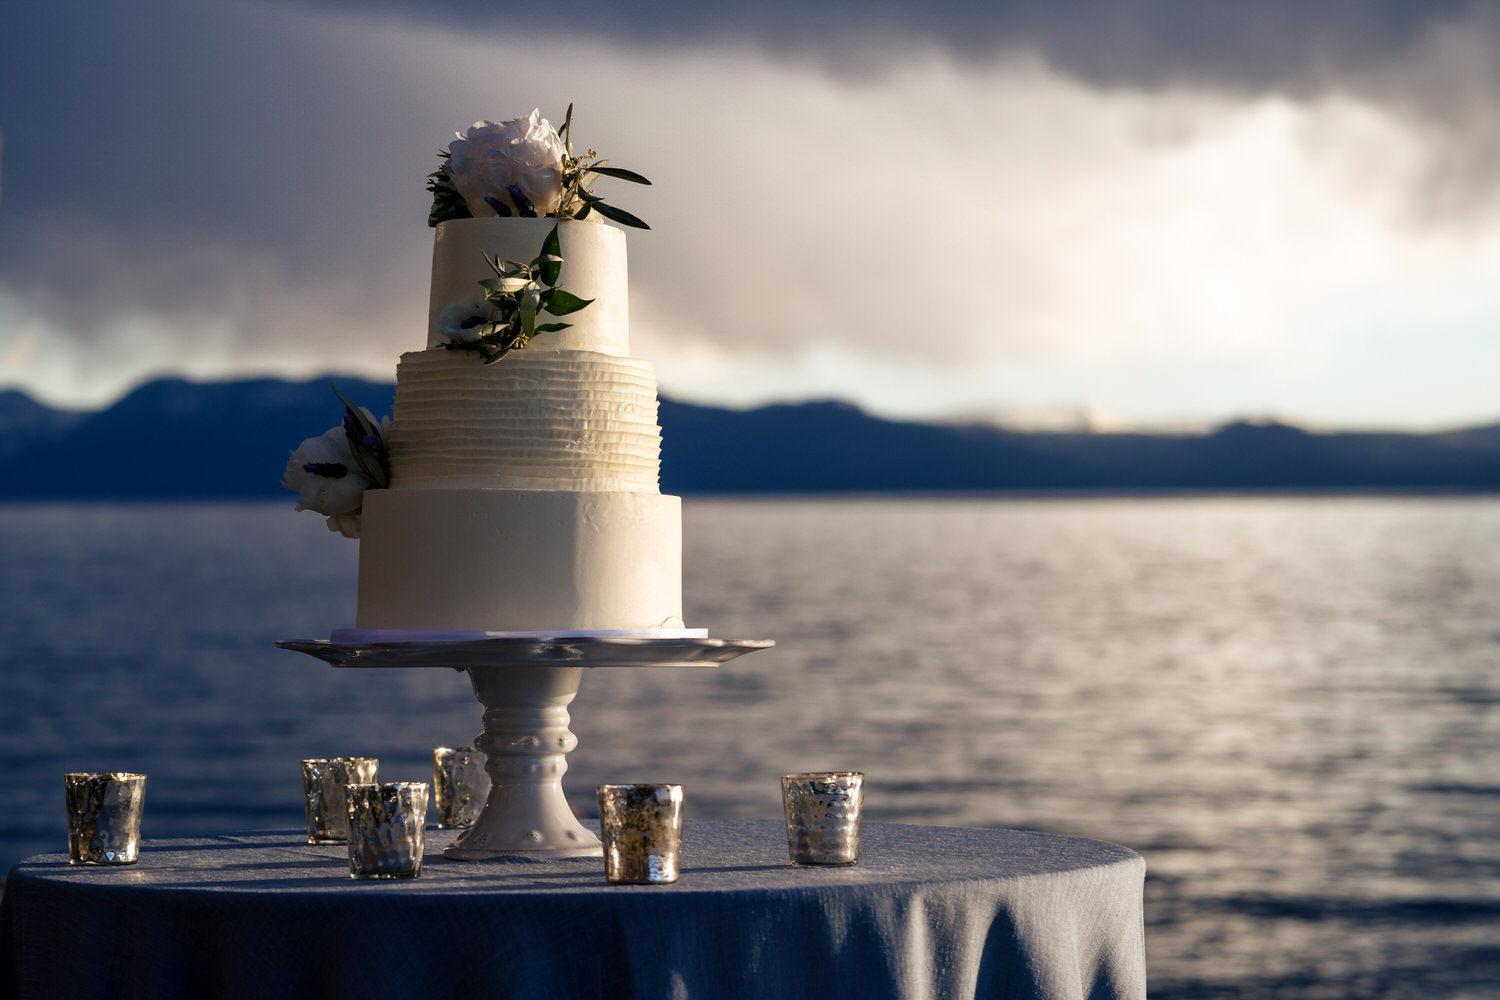 Three tier wedding cake on a table with Lake Tahoe in the background.